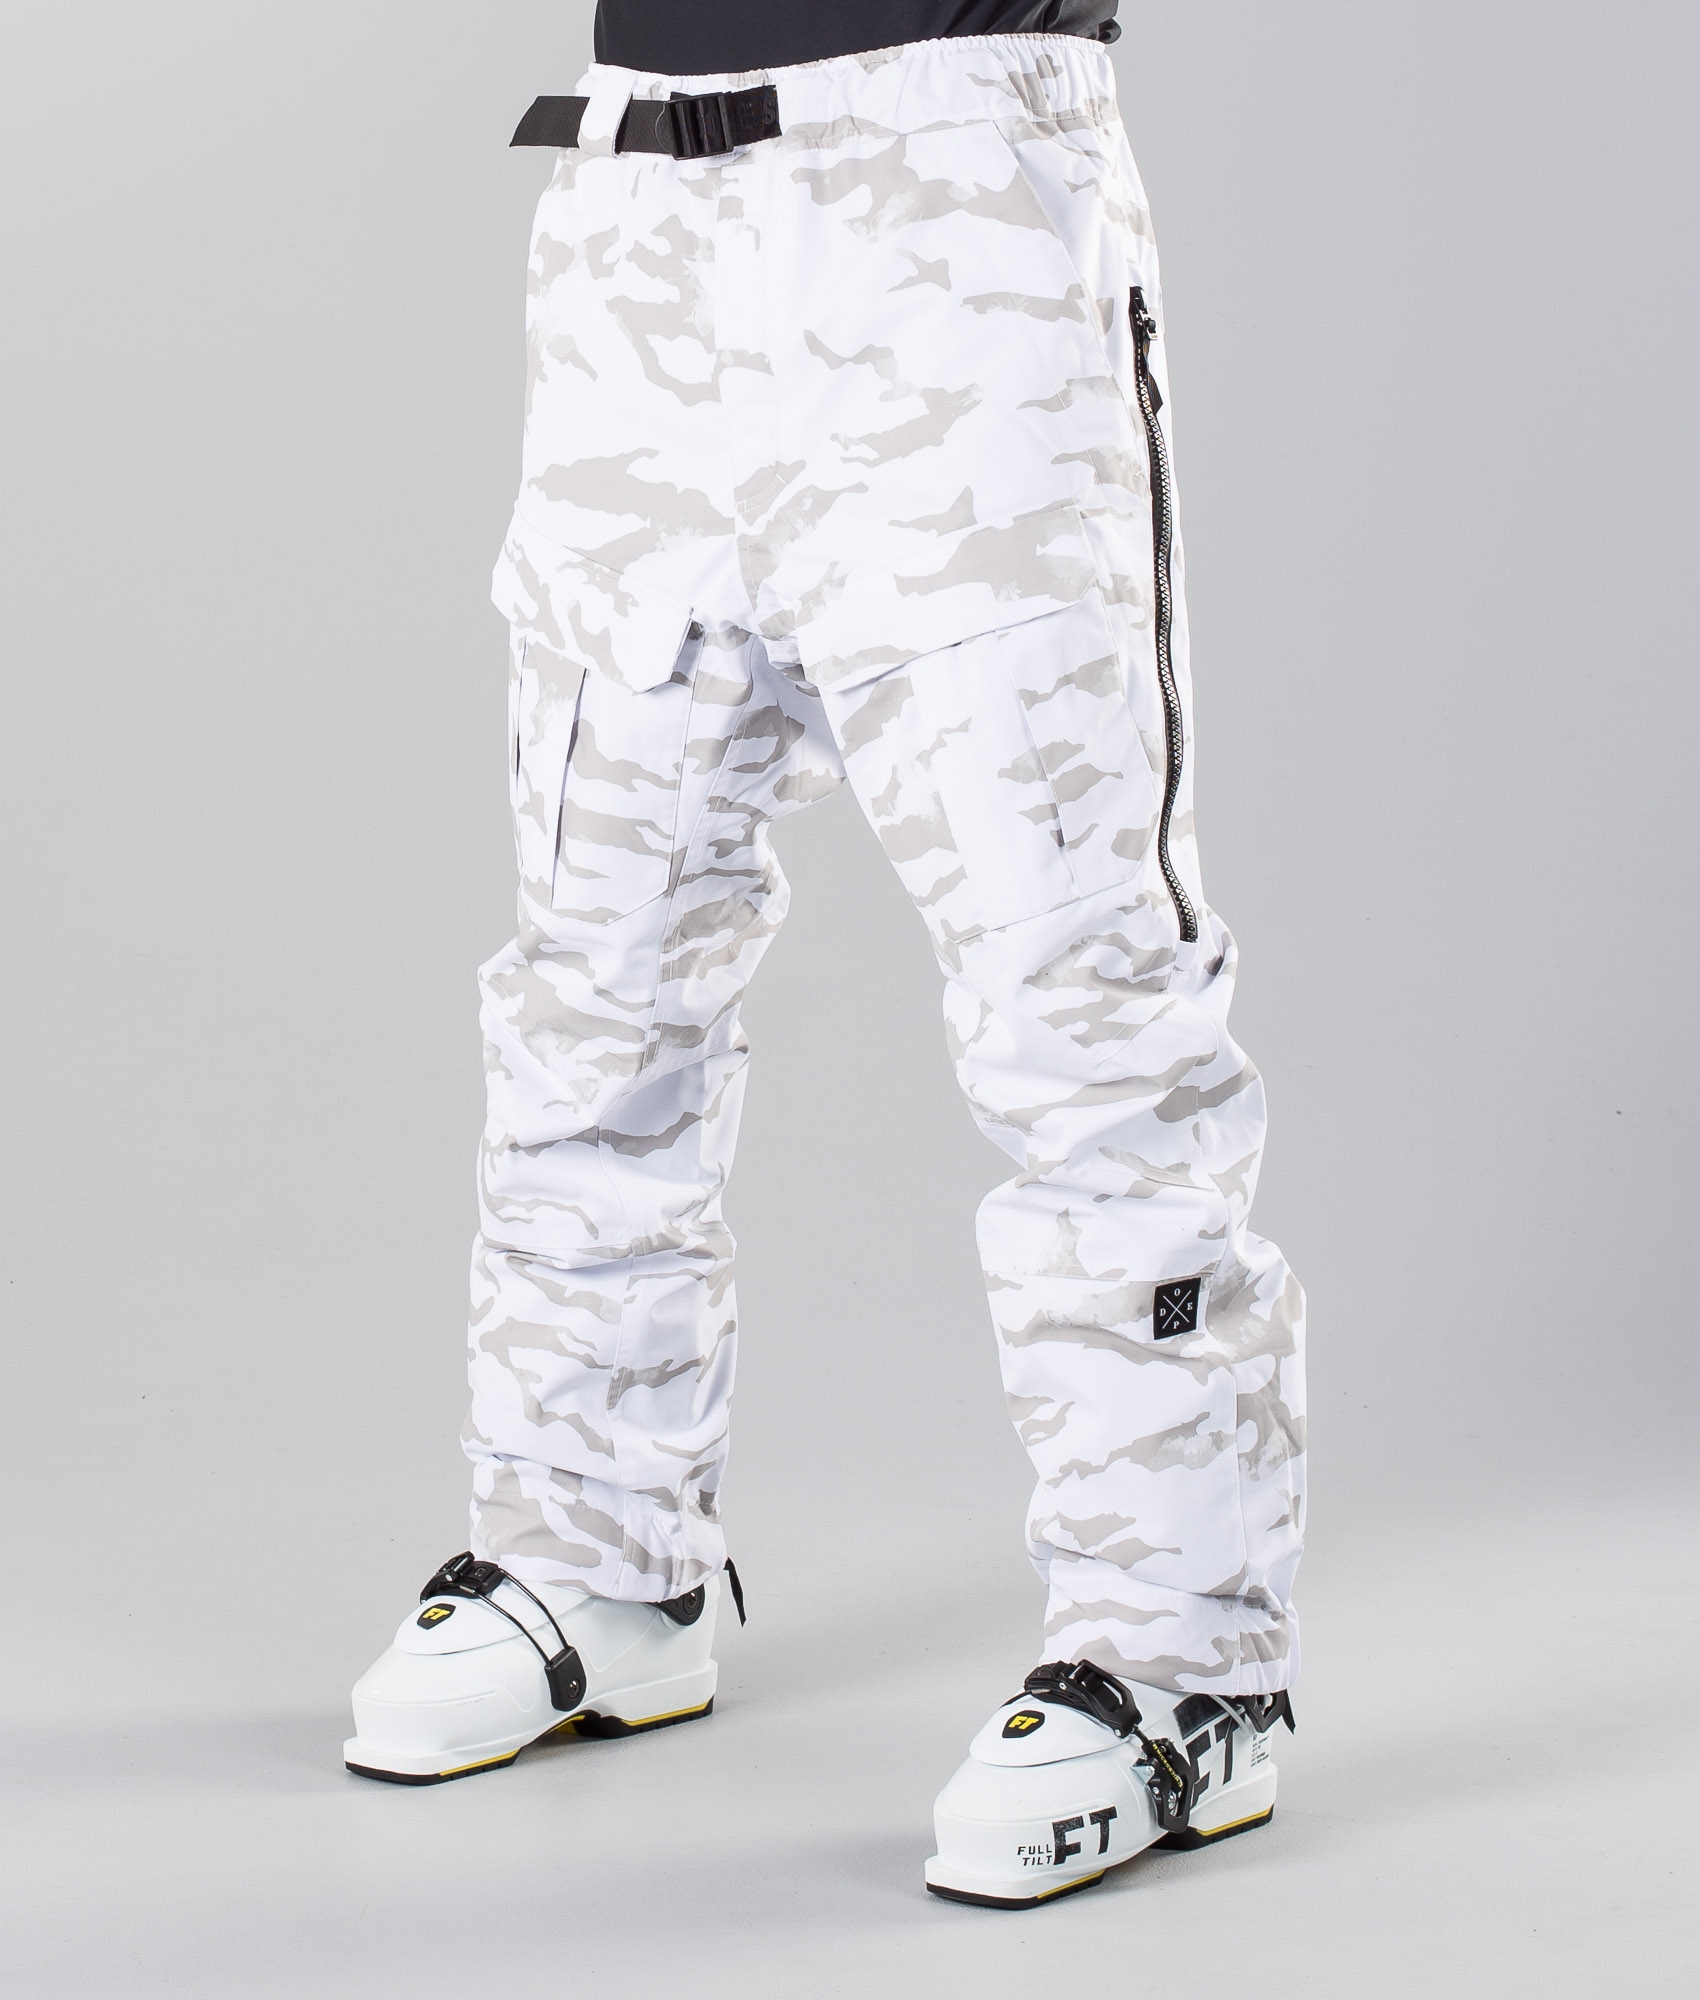 black and white camouflage pants